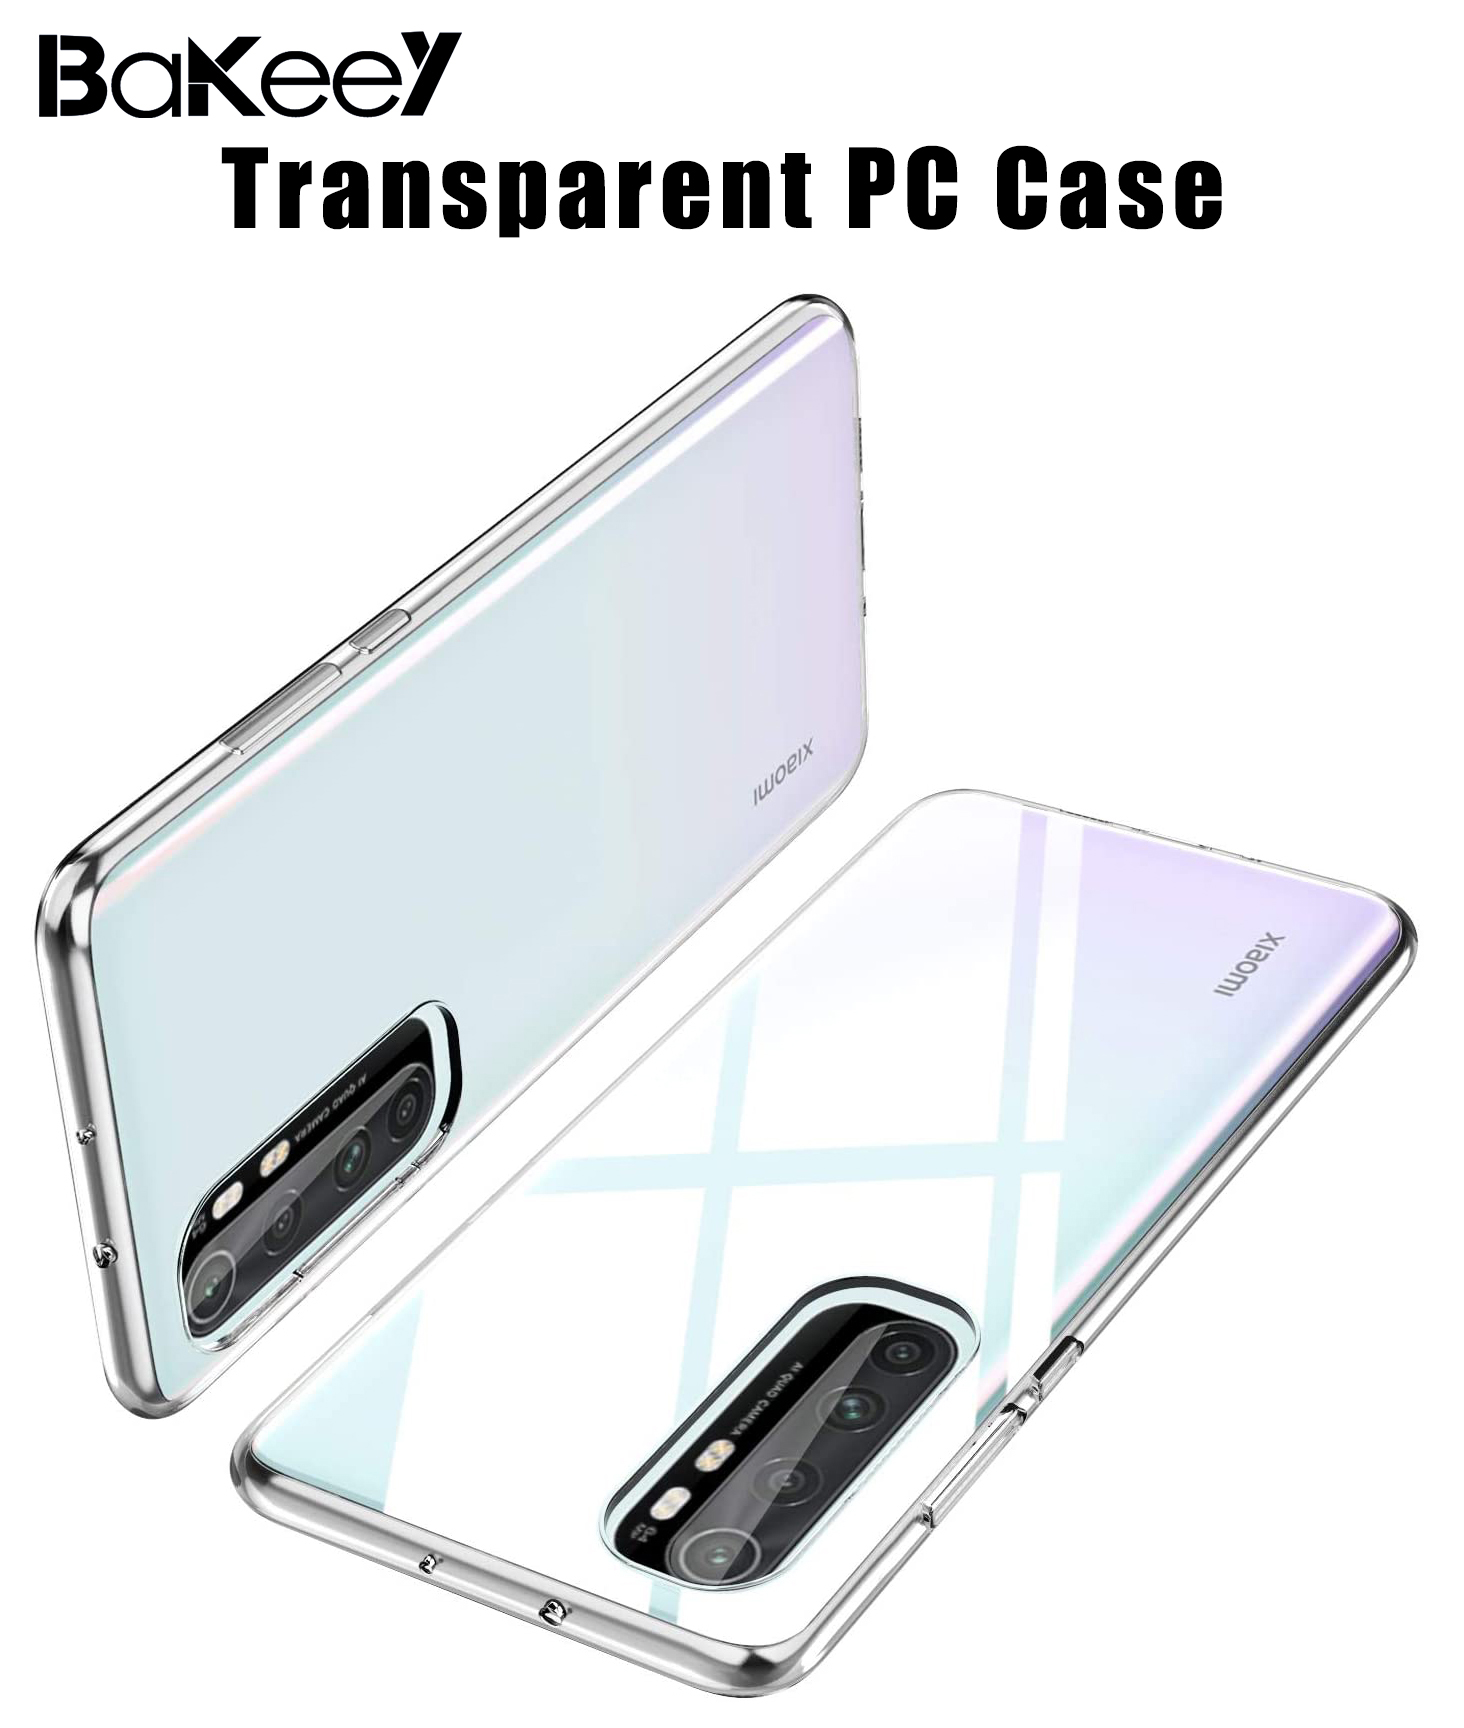 Bakeey-for-Xiaomi-Mi-Note-10-Lite-Case-Crystal-Transparent-Shockproof-Hard-PC-Non-yellow-Protective--1695314-1